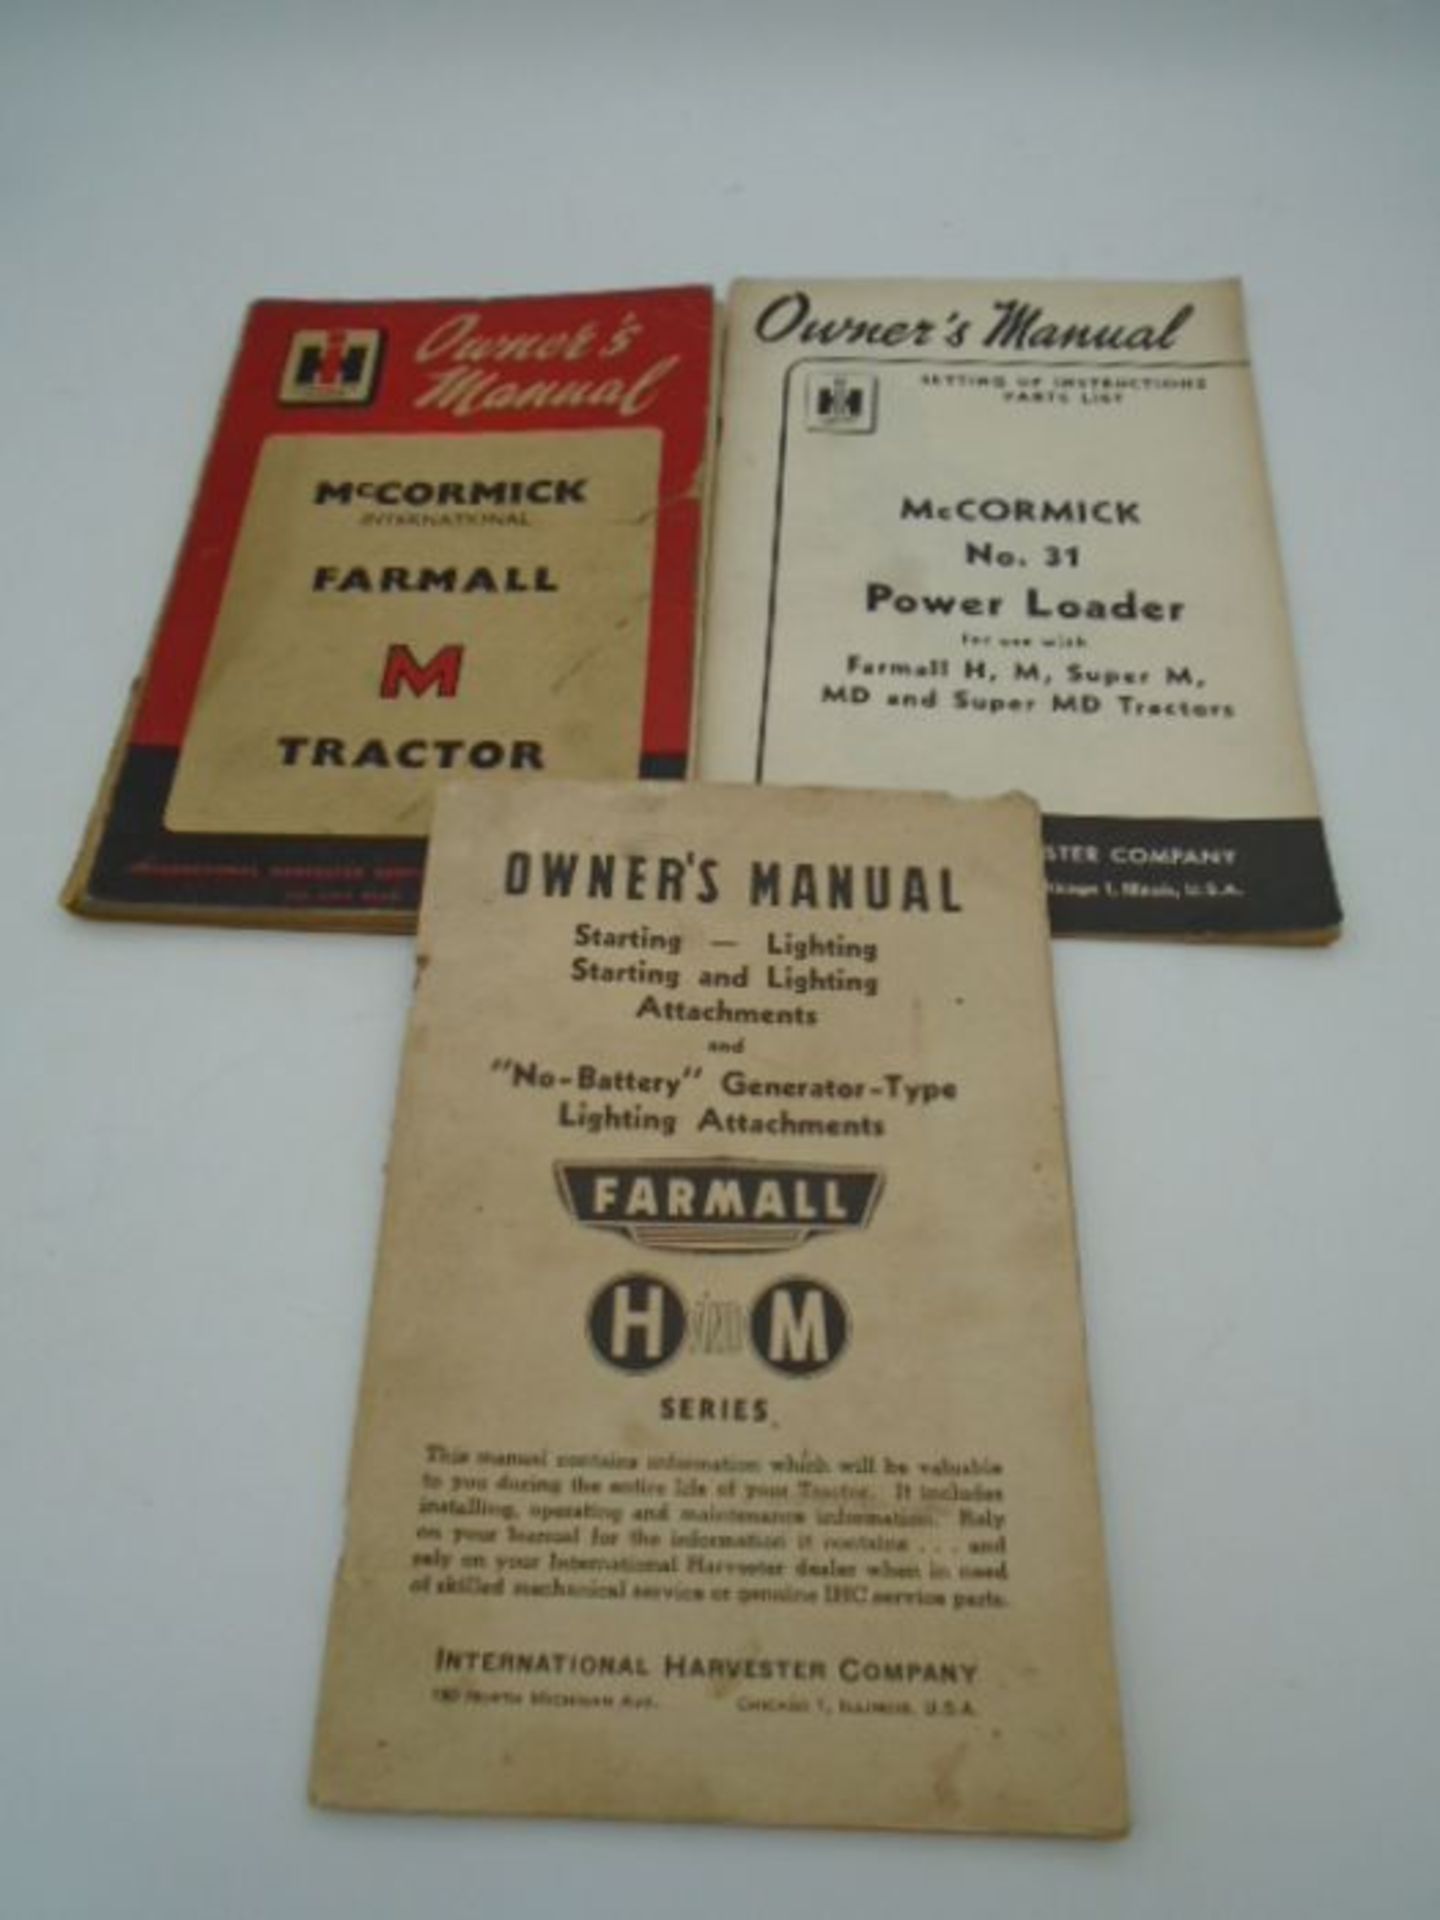 3 owners manuals - 'M' tractor plus 2 others